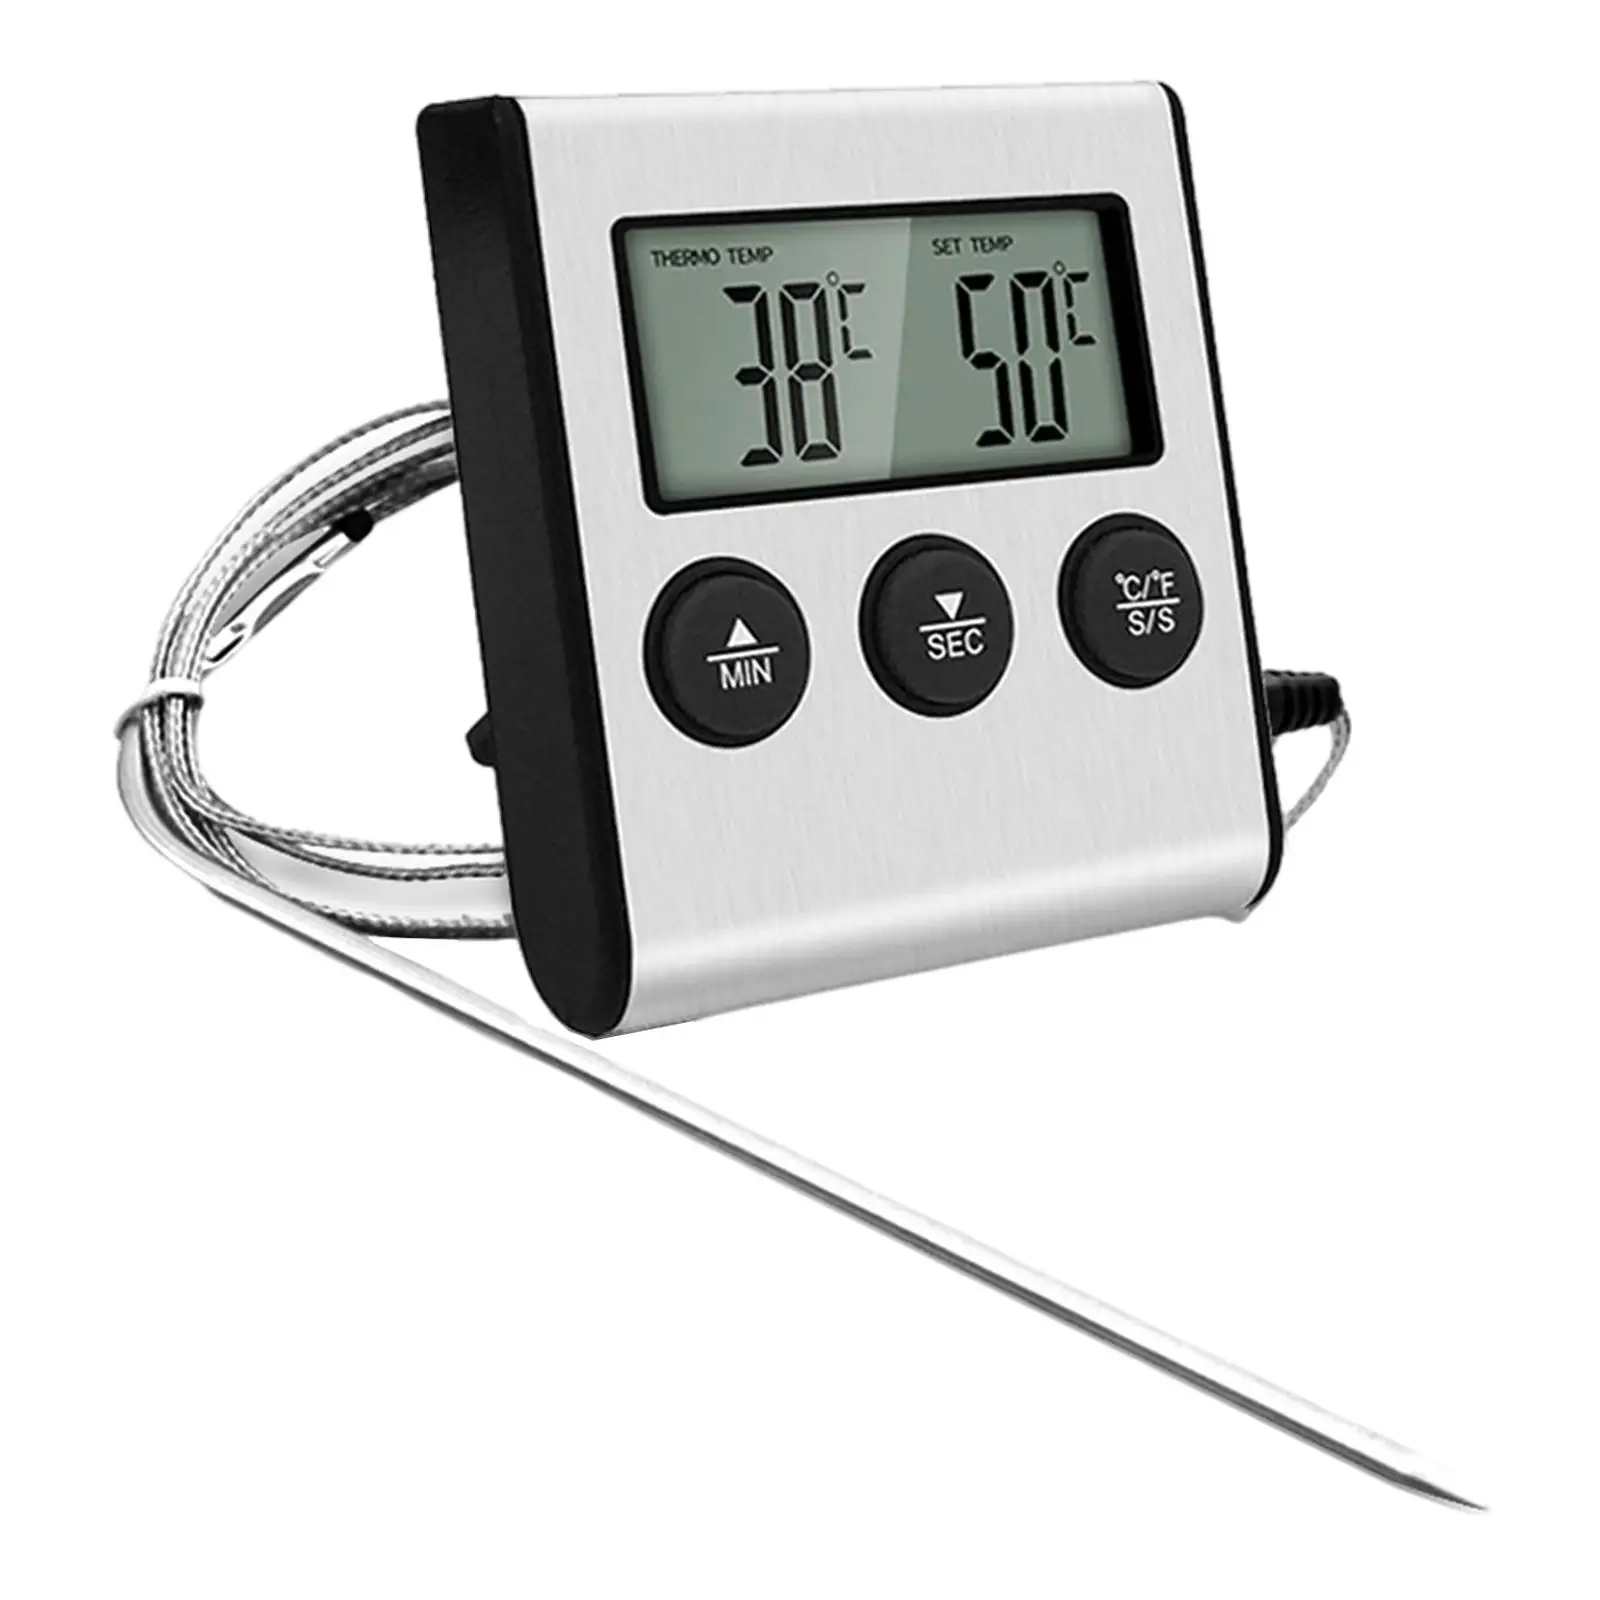 Protable Digital Cooking Food Meat Smoker Oven Kitchen BBQ Grill Thermometer